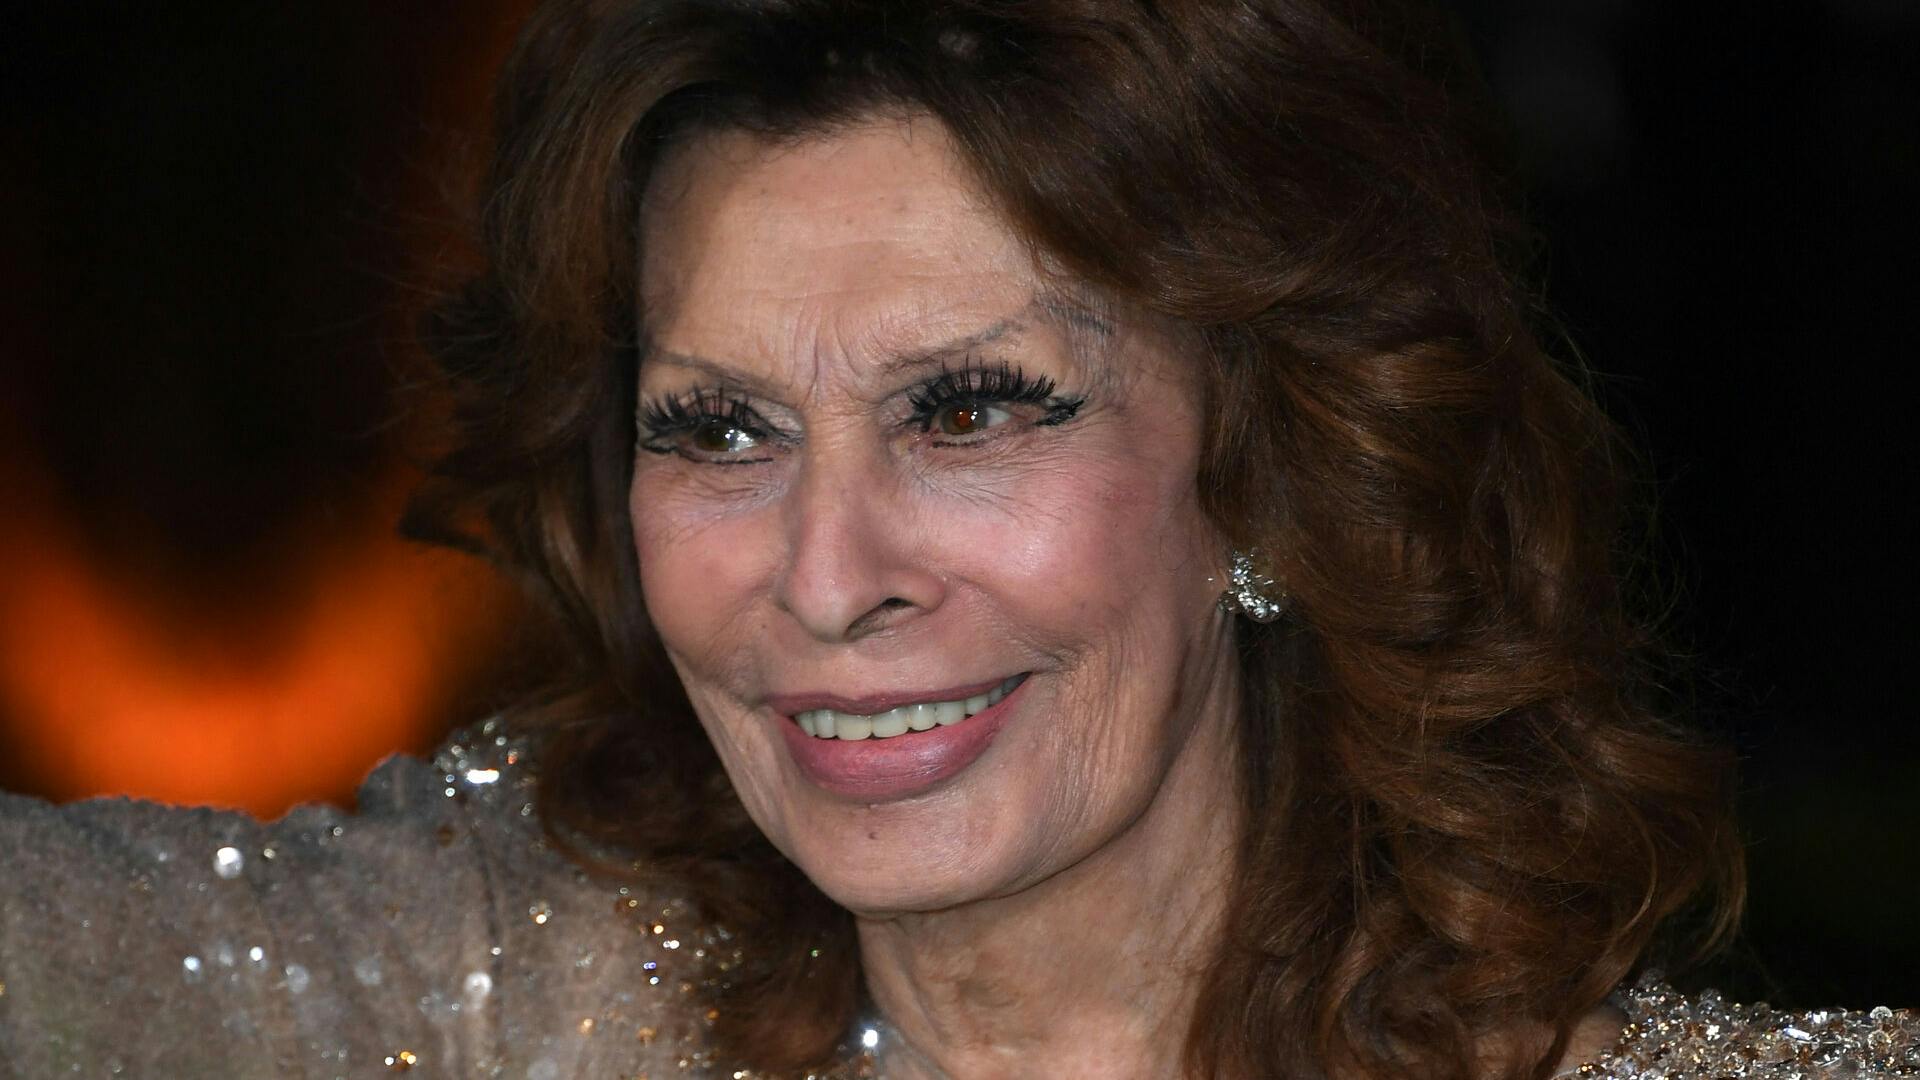 Italian actress Sophia Loren arrives for the Academy Museum of Motion Pictures opening gala on September 25, 2021 in Los Angeles, California. Valerie MACON / AFP